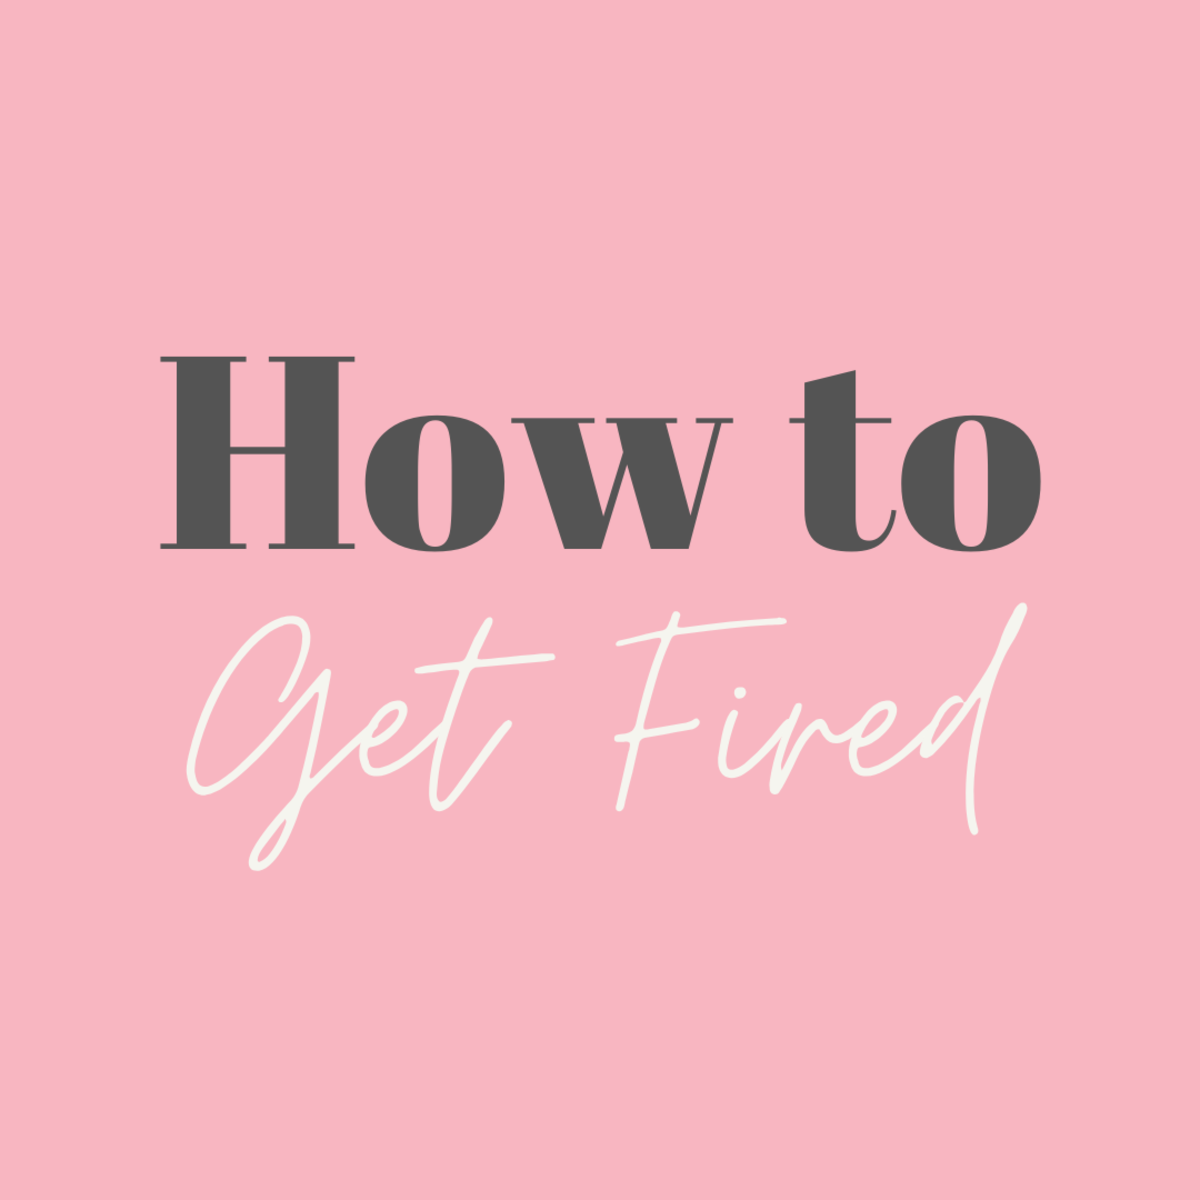 Five Ways to Get Fired